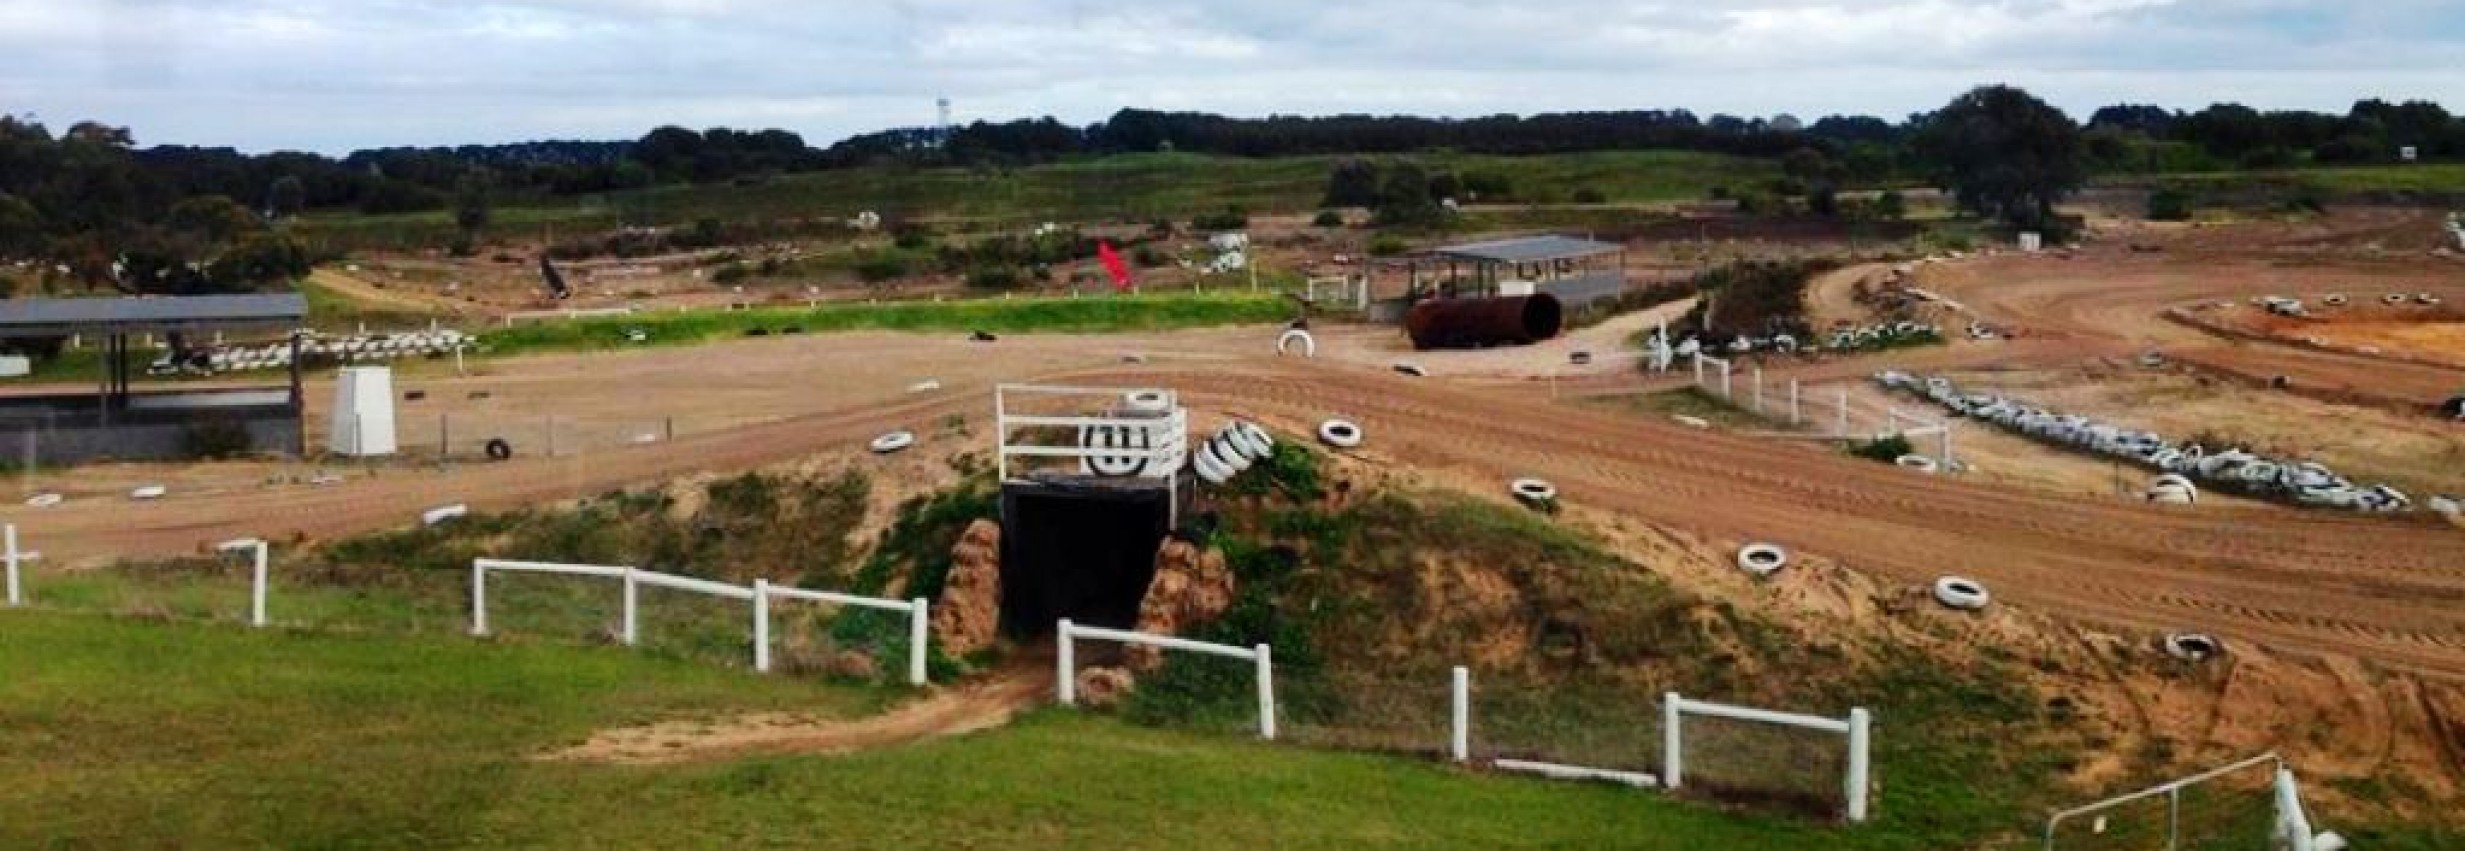 Rosebud and District Motocross Club